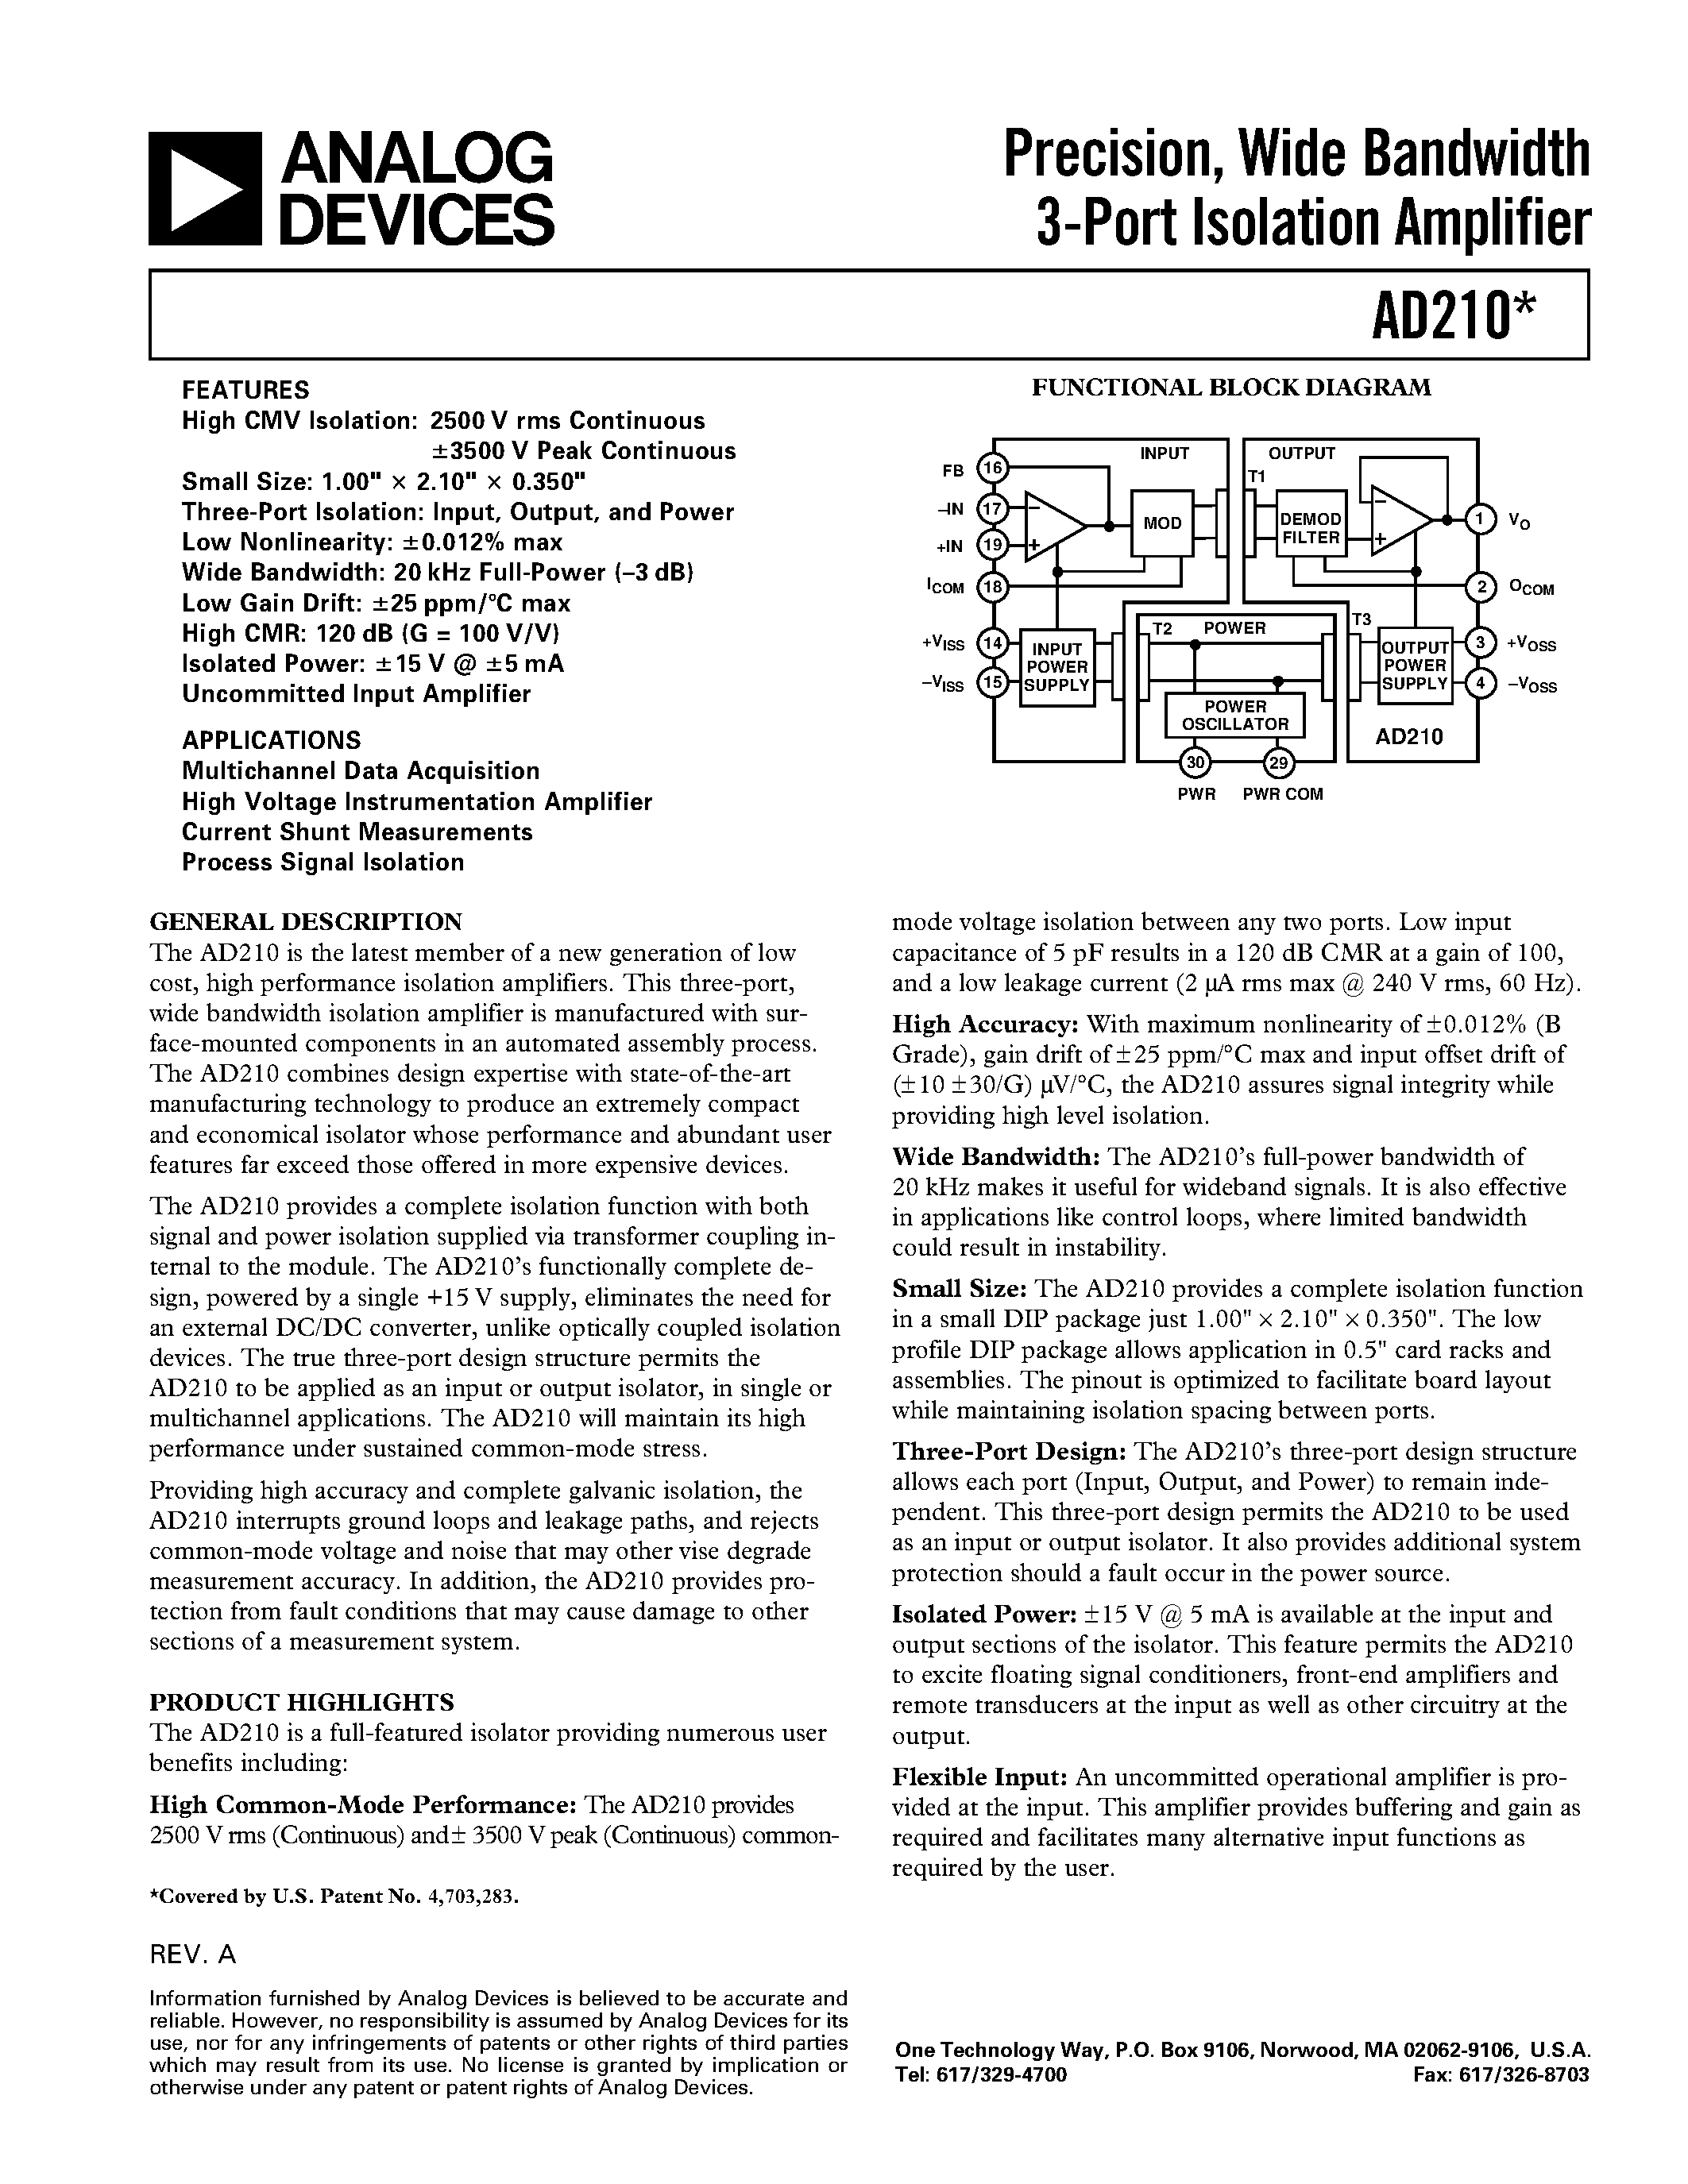 Datasheet AD210 - Precision/ Wide Bandwidth 3-Port Isolation Amplifier page 1